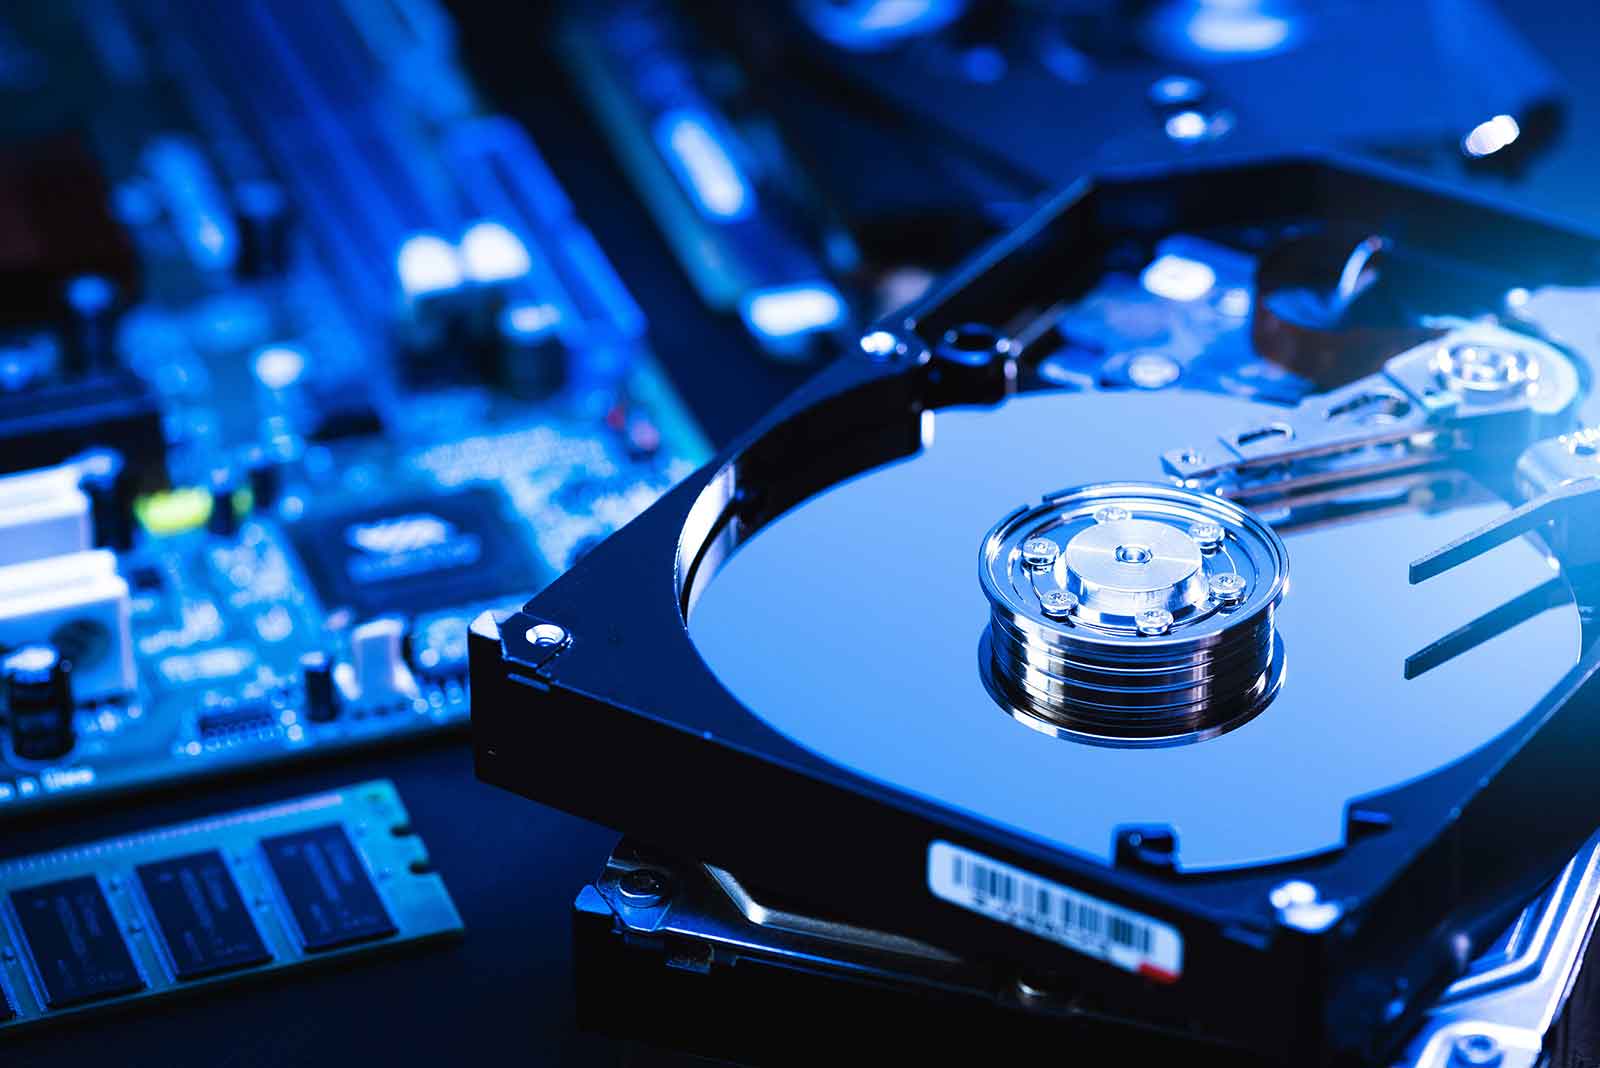 Here’s How You Can Data Recovery Deleted Files